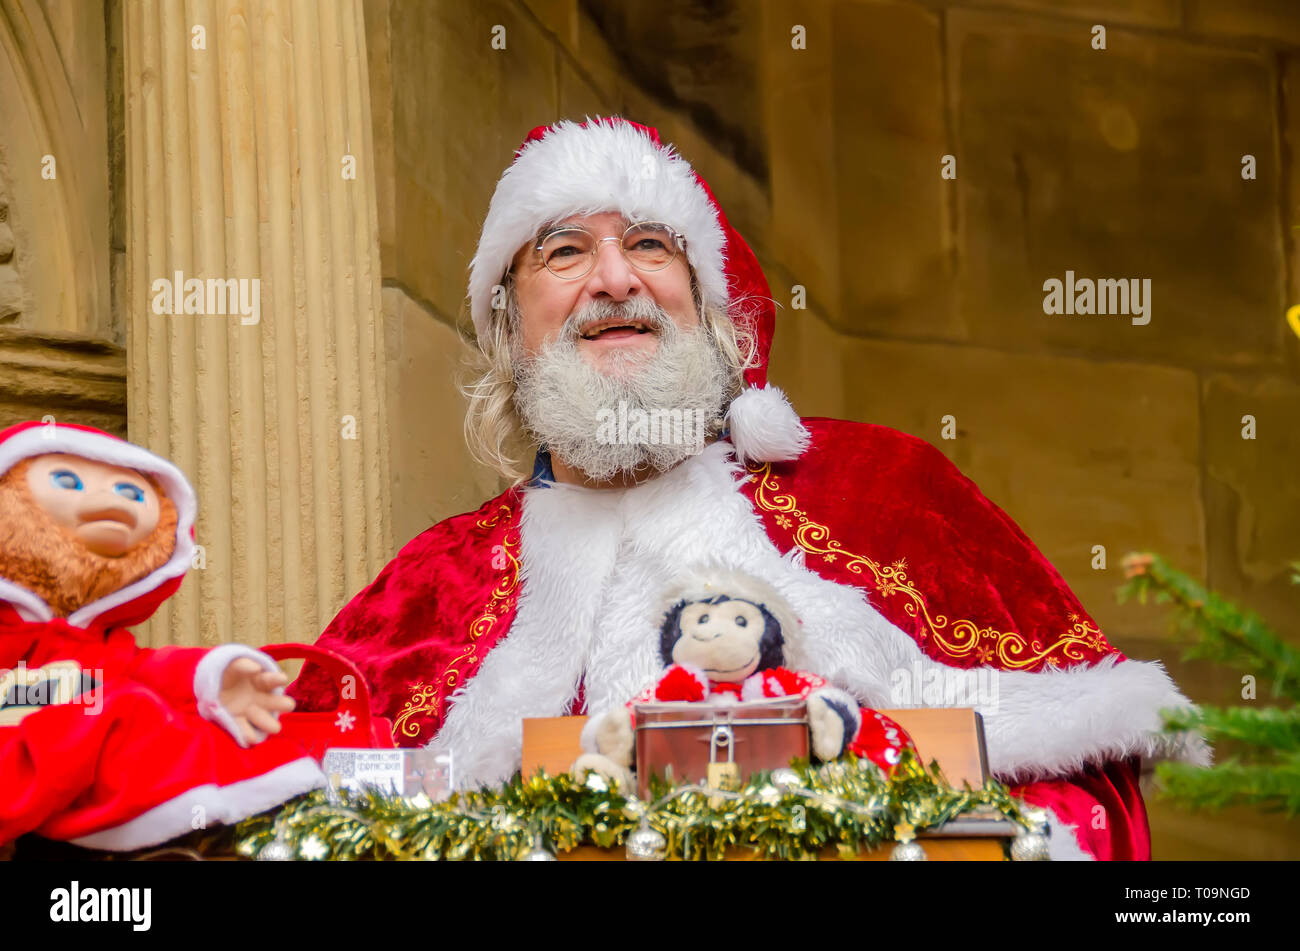 Smiling man dressed  as Santa Claus or Father Christmas (der Weihnachtsmann0 in  Rothenburg ob der Tauber,  Germany Stock Photo